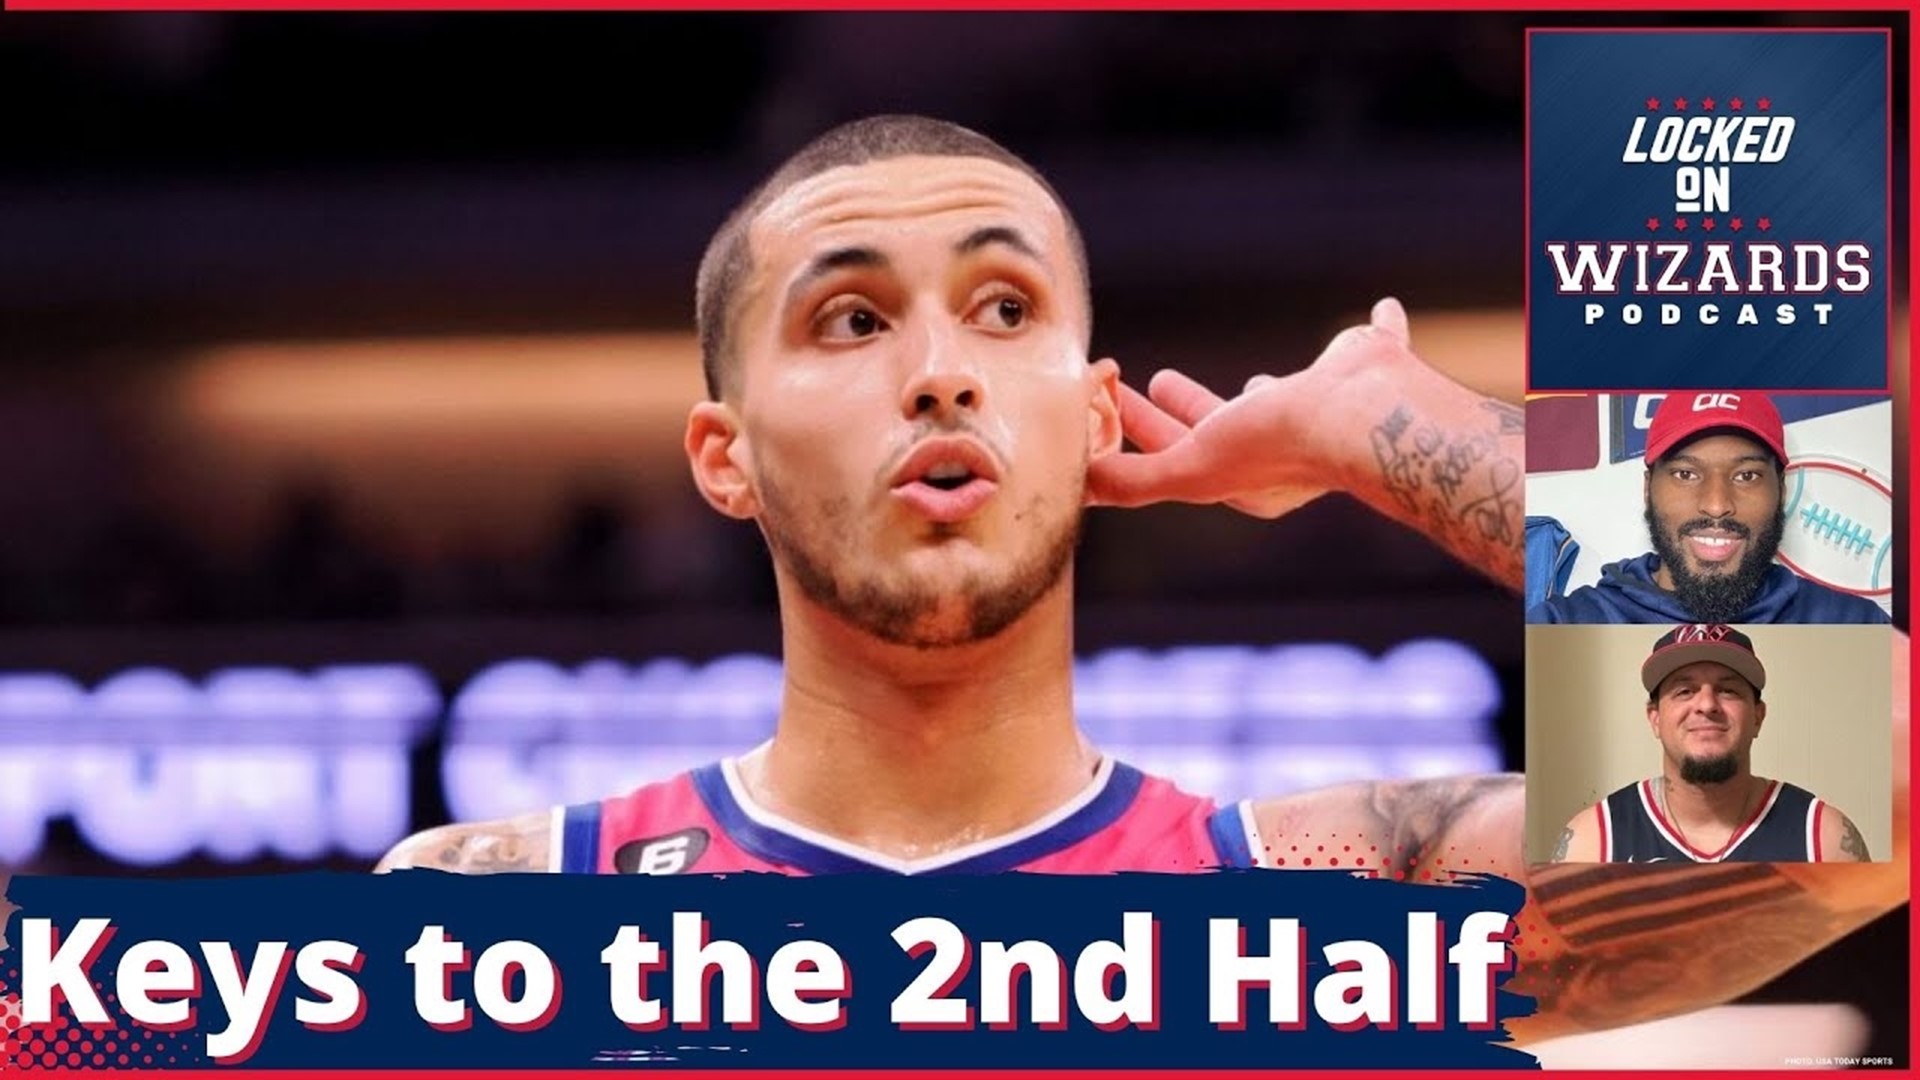 Ed and Brandon discuss their keys for the Wizards in the 2nd half of the 2023-2024 regular season. They also preview Thursday night's game vs the Denver Nuggets.